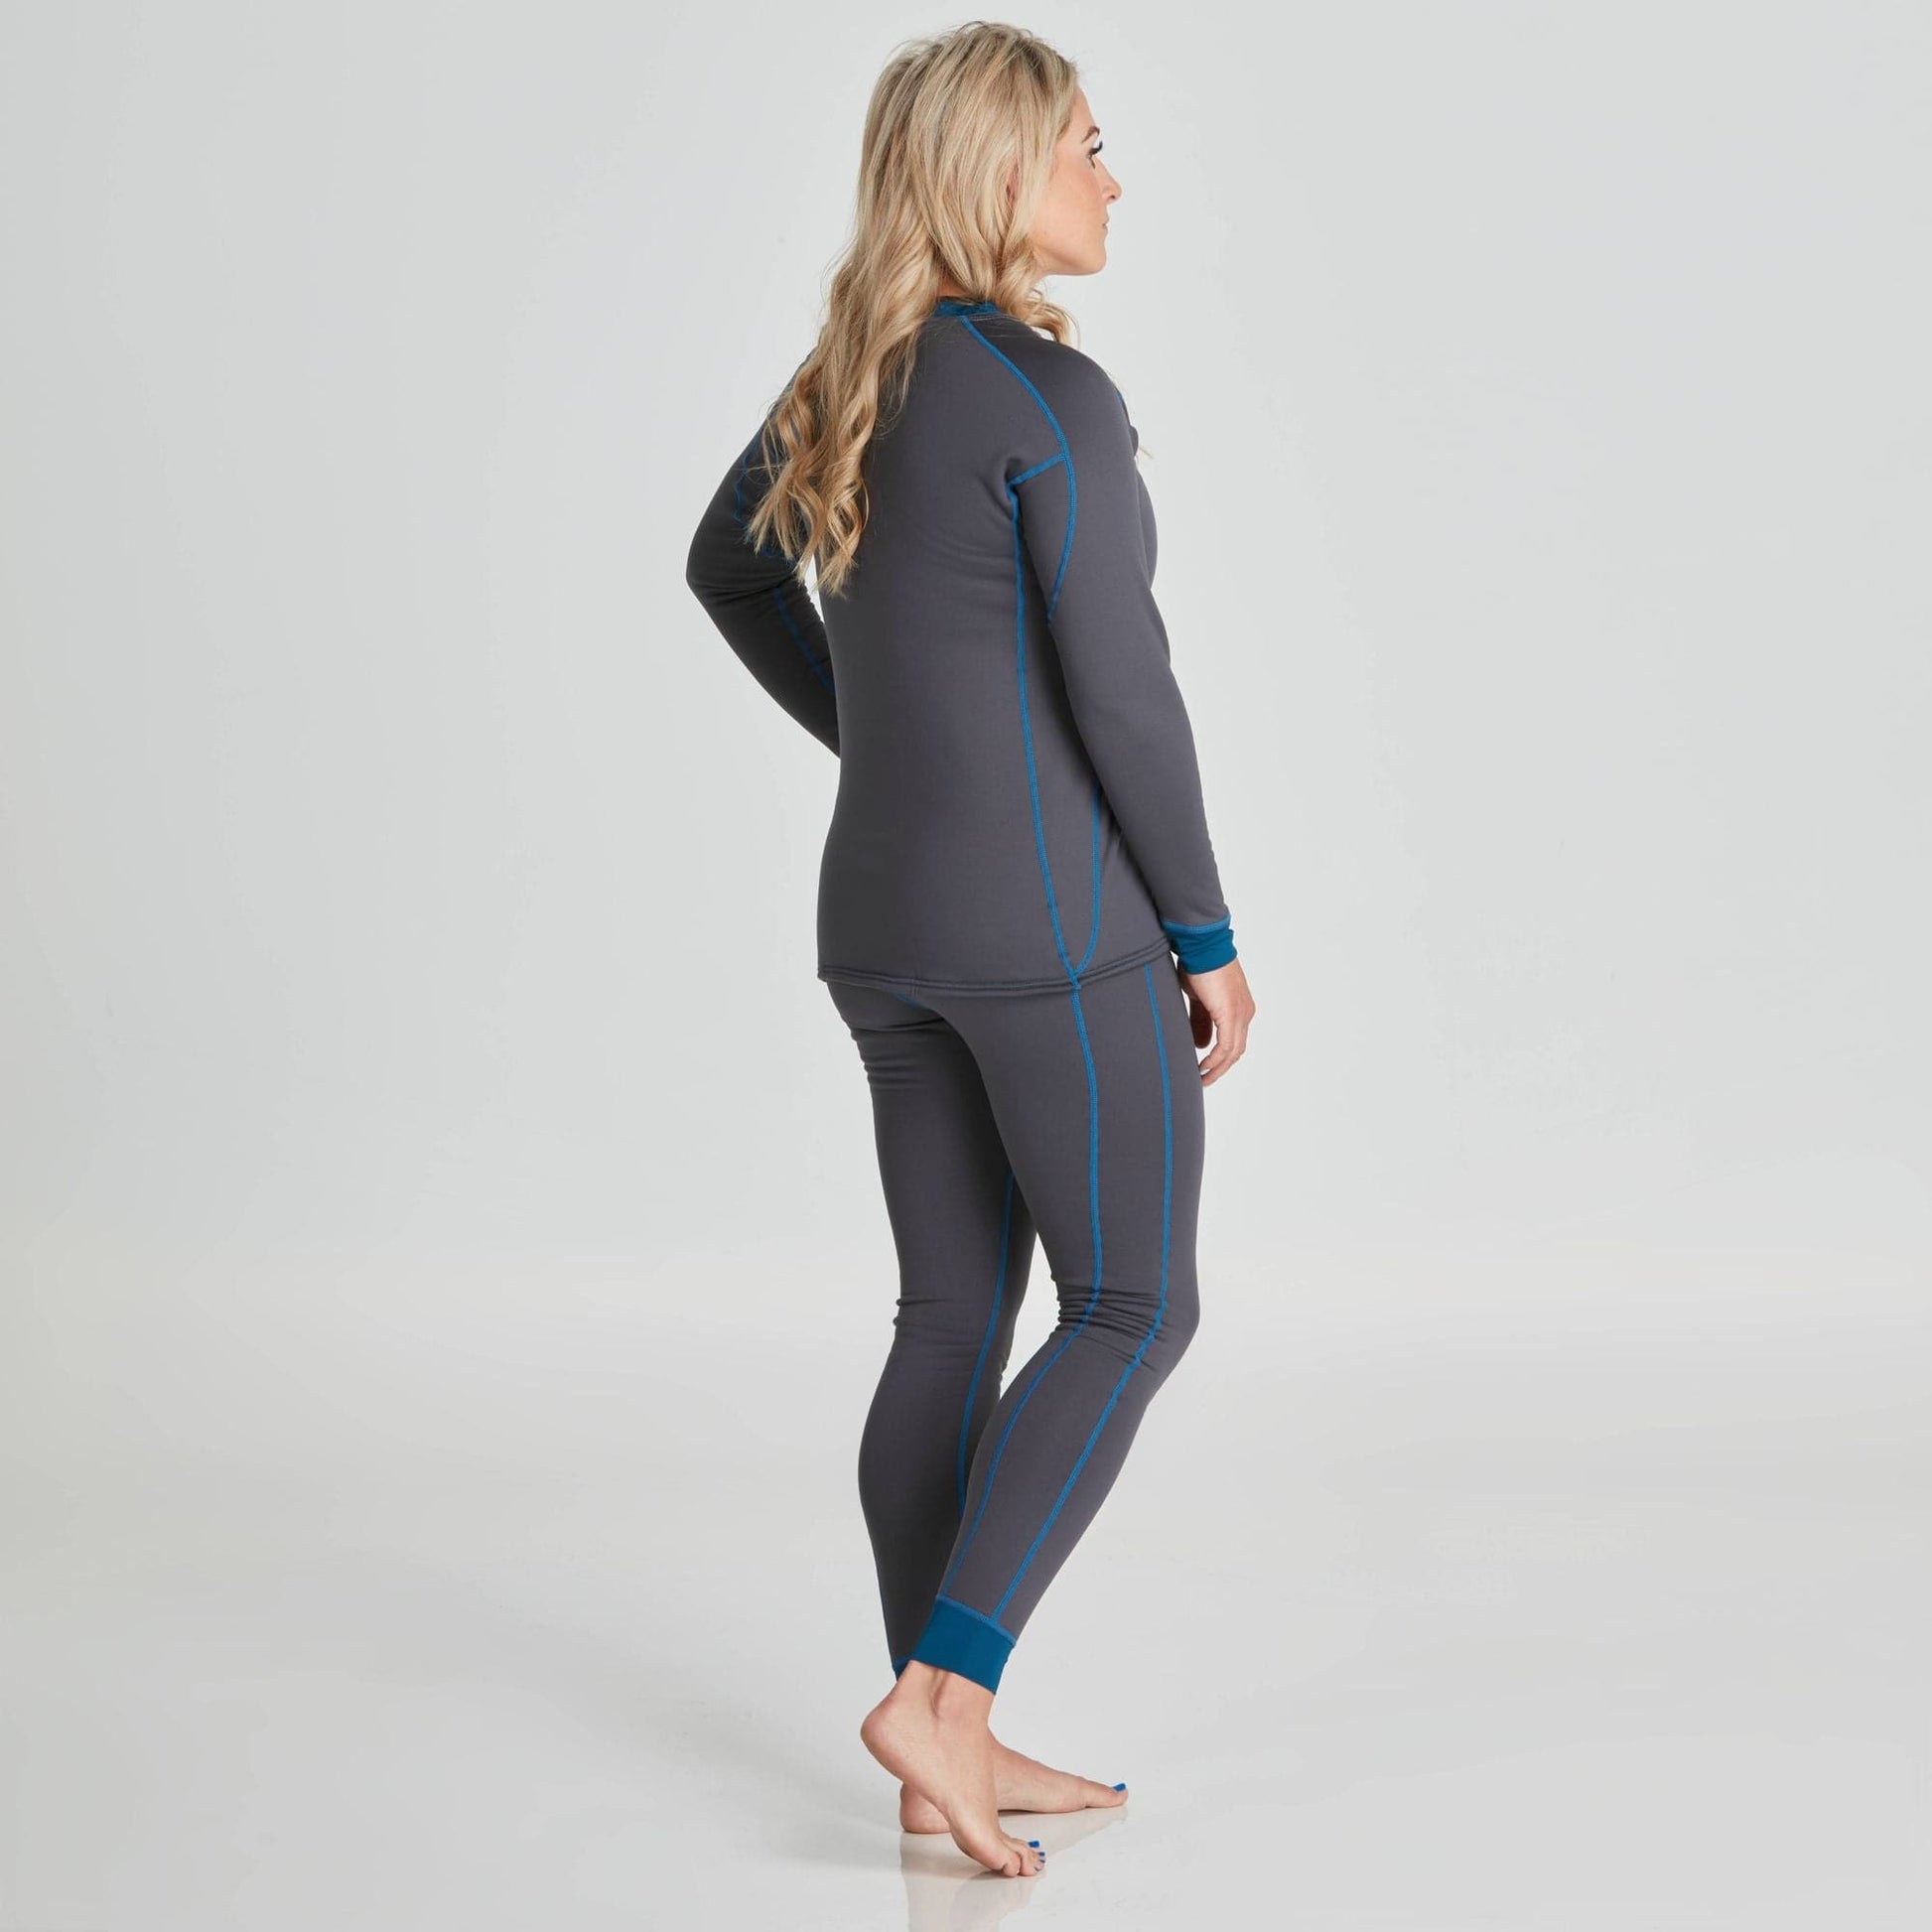 The back view of a woman wearing a NRS Expedition Fleece - Women's neoprene suit, providing both comfort and warmth.